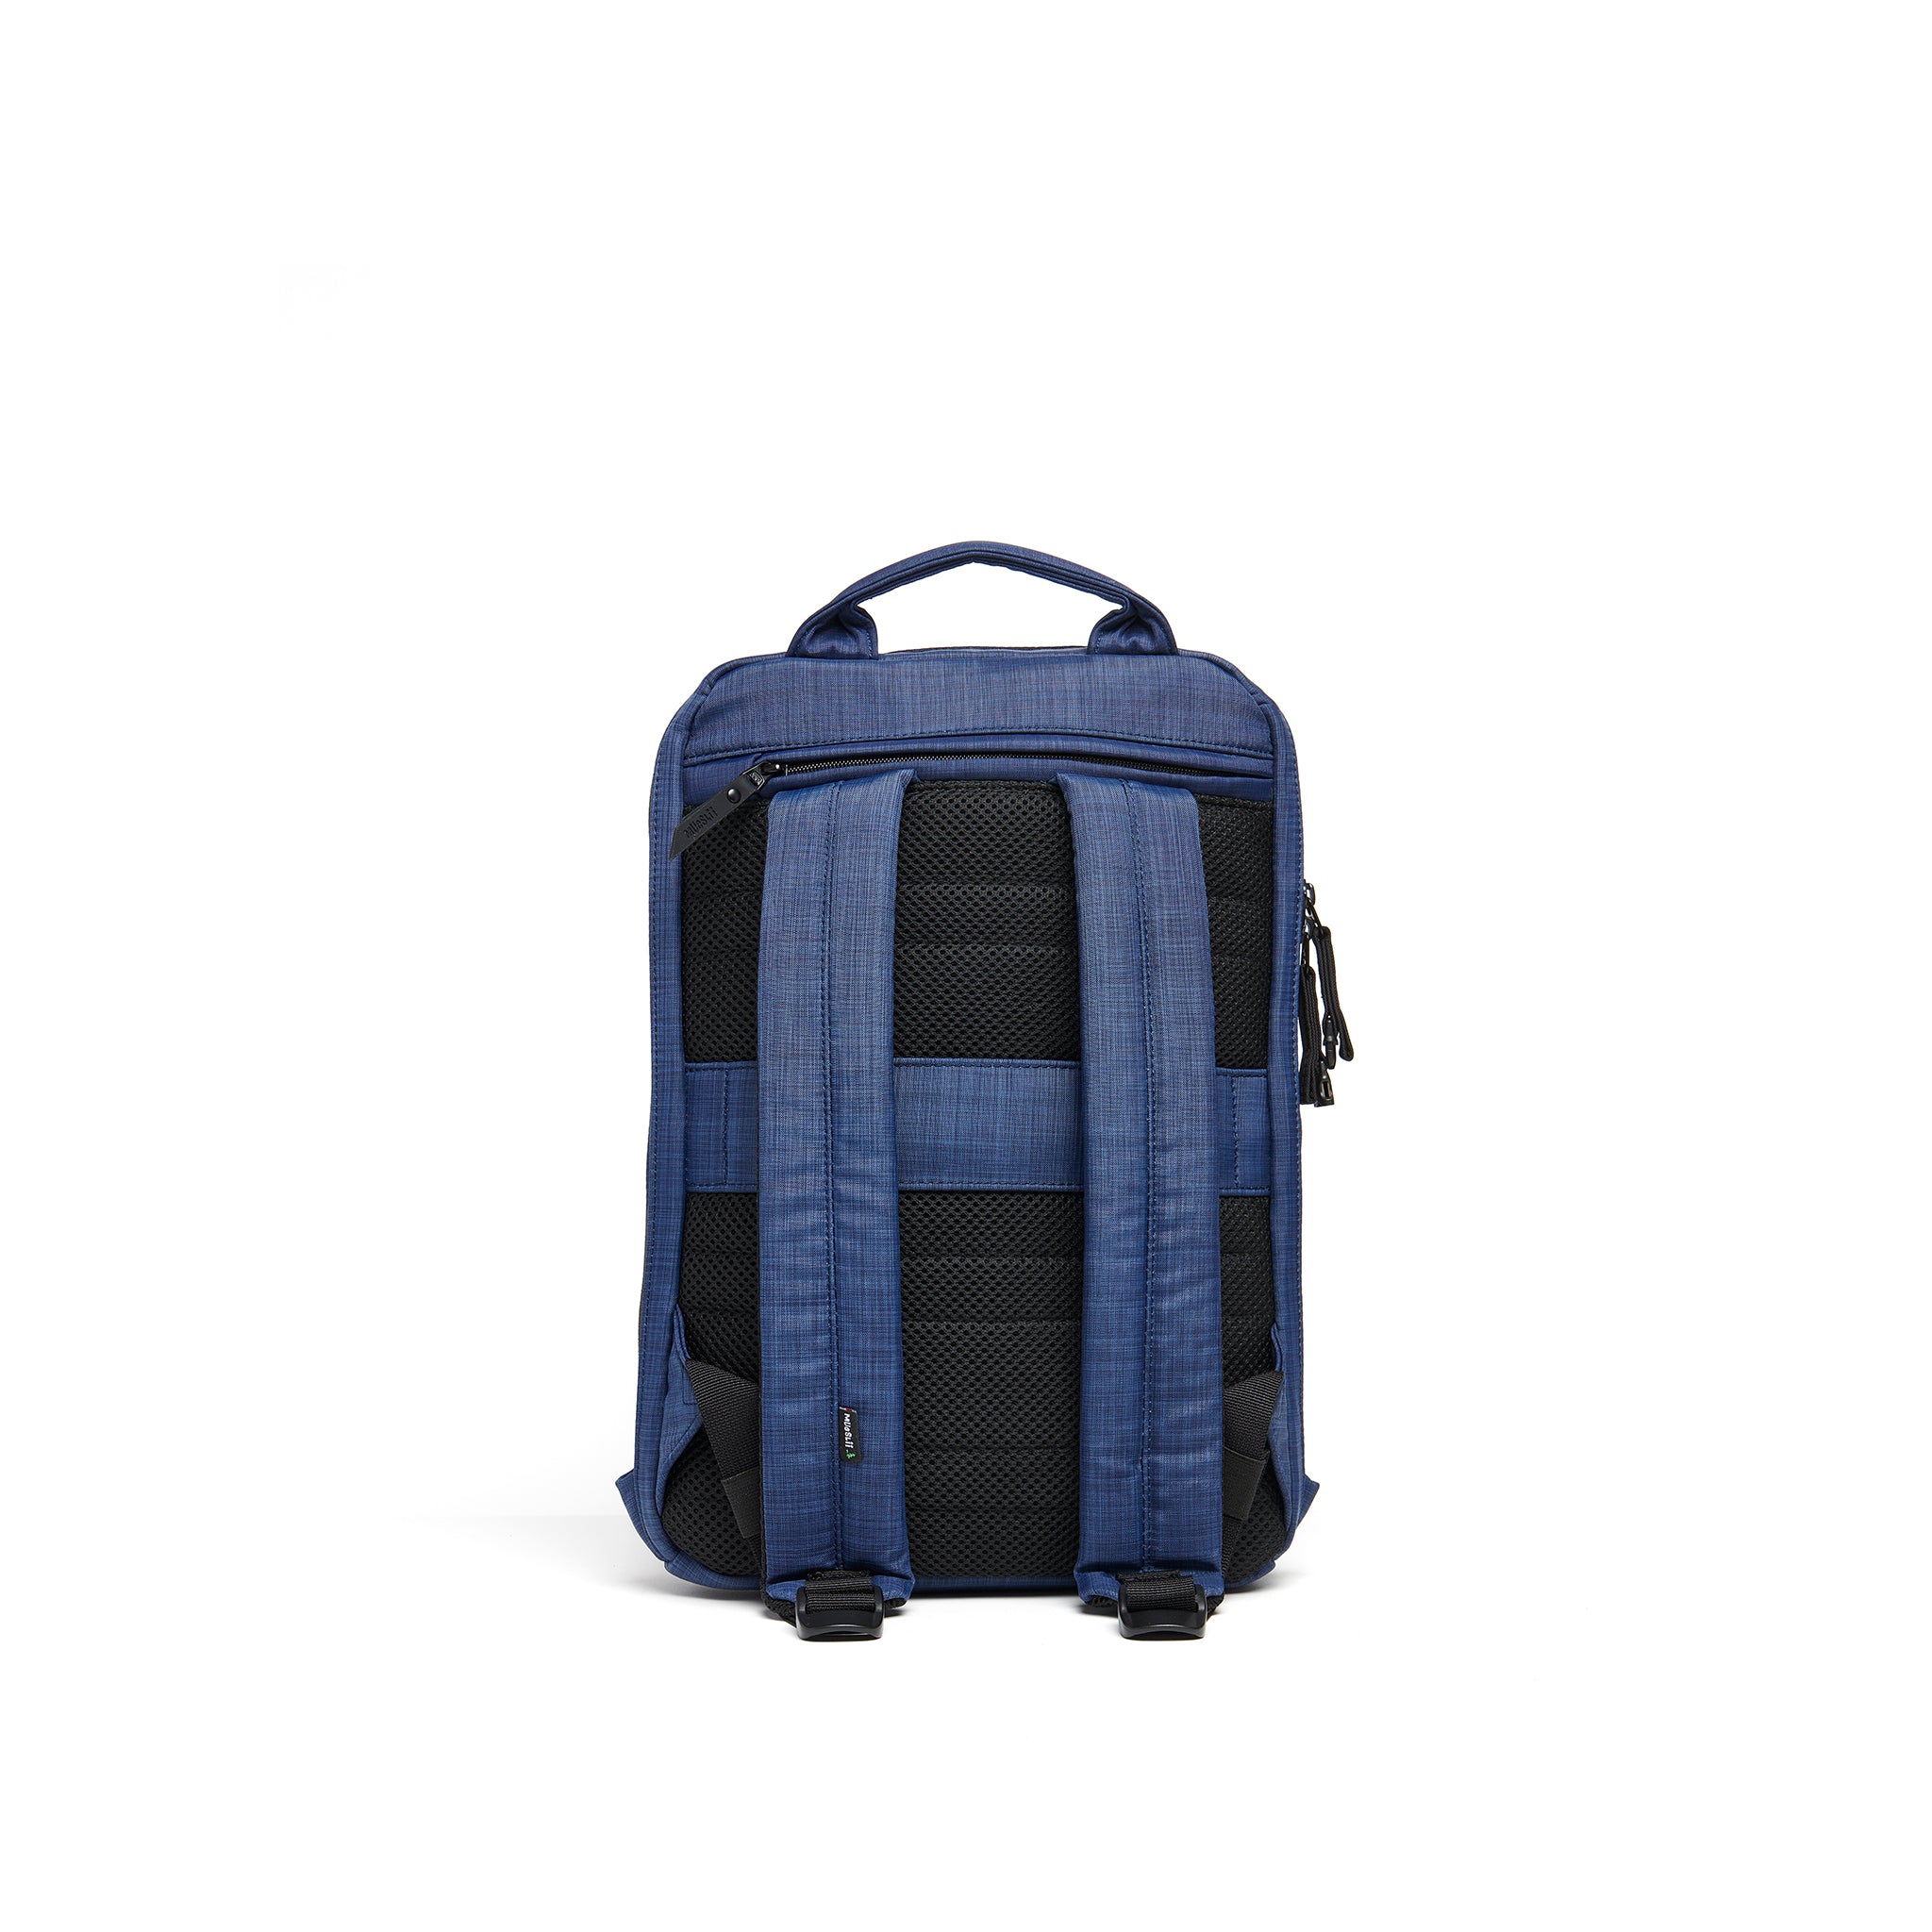 Mueslii small backpack,  made of  water resistant canvas nylon,  with a laptop compartment, color ocean blue, back view.